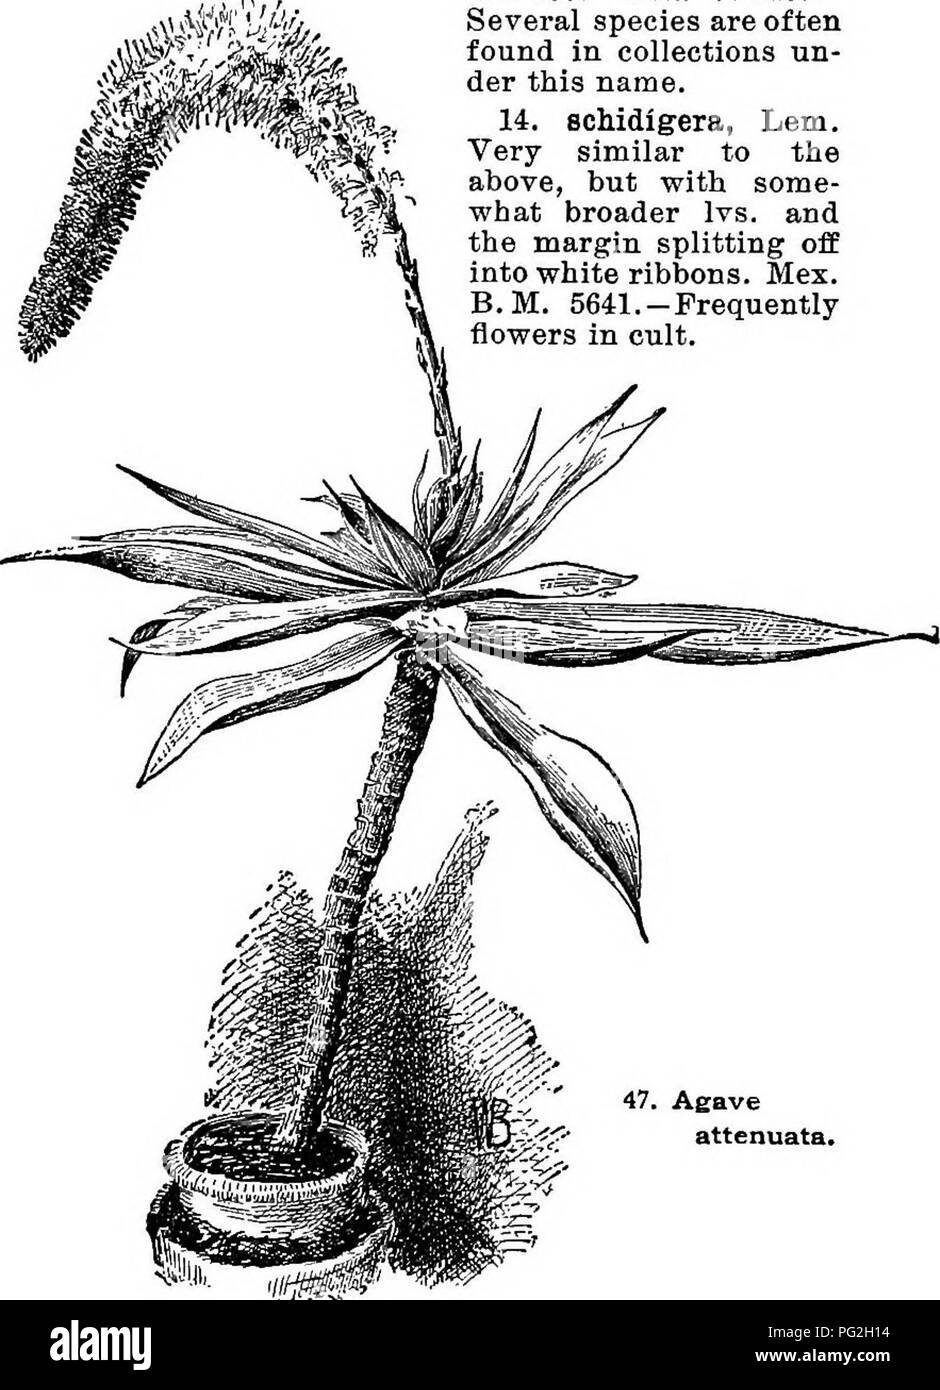 . Cyclopedia of American horticulture, comprising suggestions for cultivation of horticultural plants, descriptions of the species of fruits, vegetables, flowers, and ornamental plants sold in the United States and Canada, together with geographical and biographical sketches. Gardening. 34 AGAVE AGAVE lata, 39 ; maculosa, 38 ; Mexlcana, 2 ; mlcracantha, 33 mitis, 33; mitrmformis, 5; Nissoni, 25; potatorum, 11 Potosina, 41; Pringlei, 4; recurva, 34; Bichardsii, 34 rlgida, 3; rigidissima, 28; Salmiana,5; schidigera, 14 Scolymus, 11; Schottii, 18; Shawil, 9; Sisalana, 3; stri- ata, 34 ; stricta,  Stock Photo